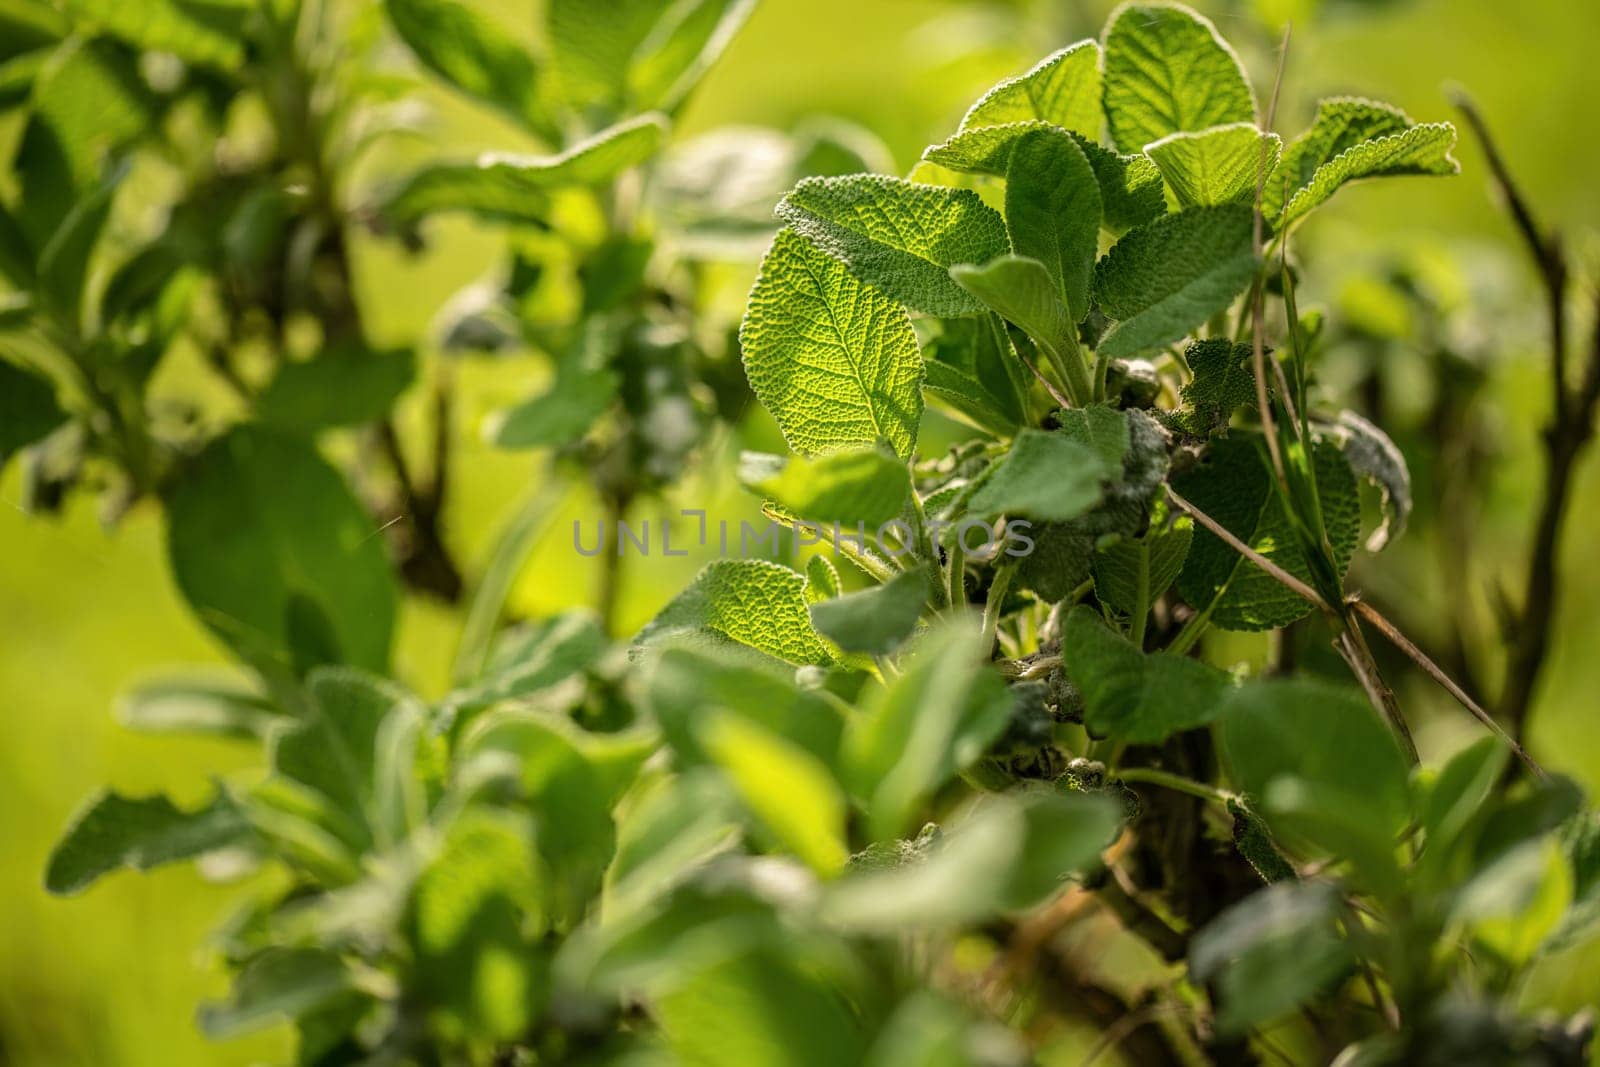 Close-up view of sage leaves, emphasizing the textured details and herbal freshness.